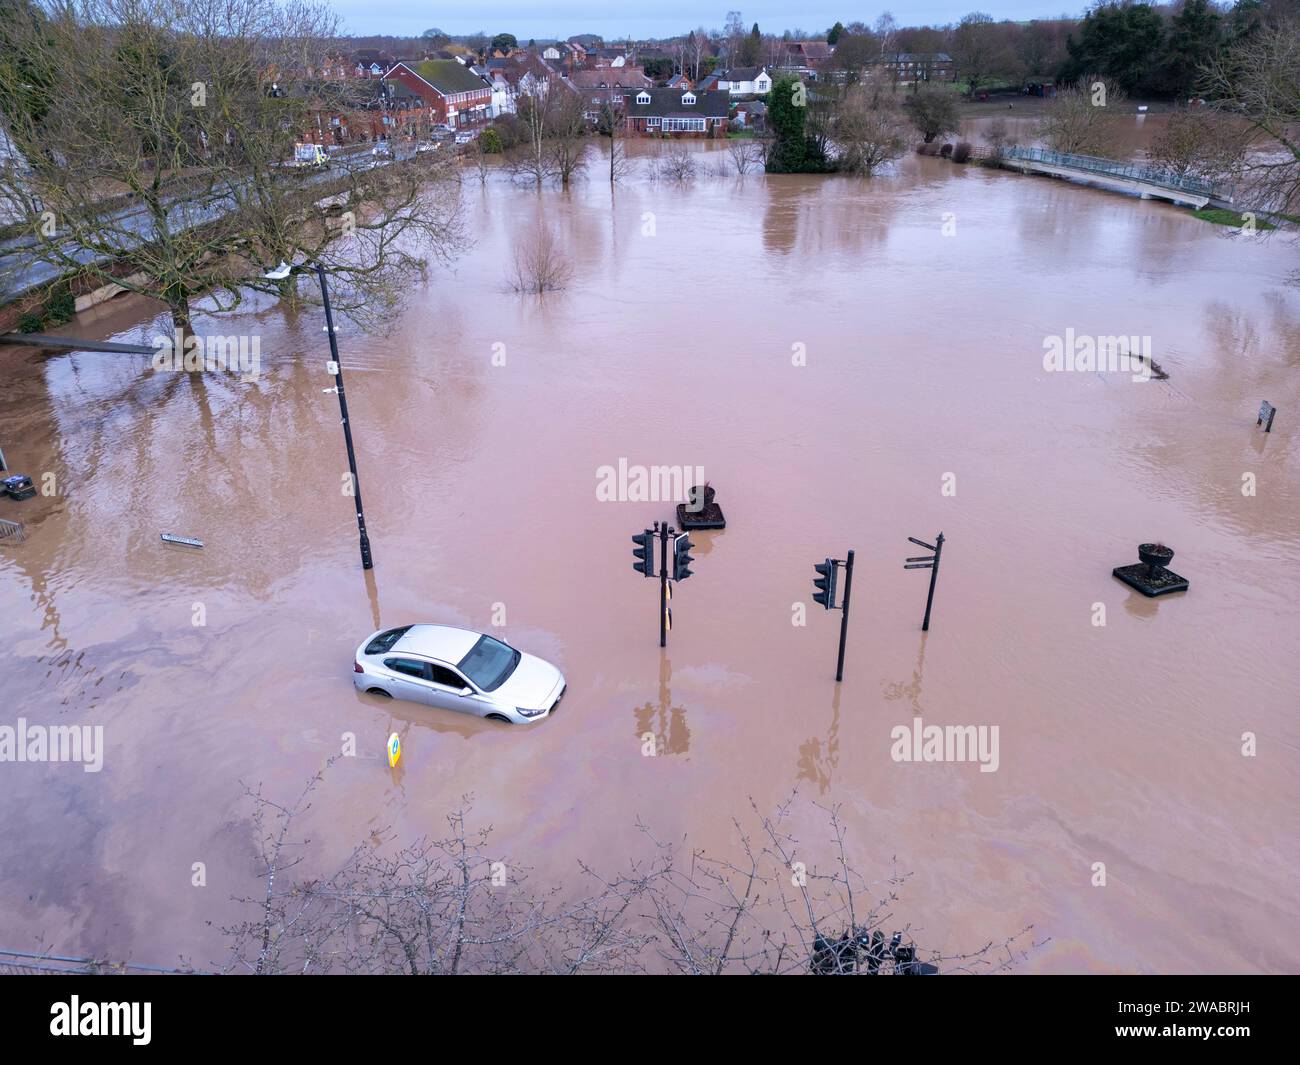 At the start of 2024 Storm Henk saw large parts of the Midlands under water after severe flooding. Pictured, scenes in the village of Polesworth, North Warwickshire where vehicles had become trapped in the deep water. Stock Photo